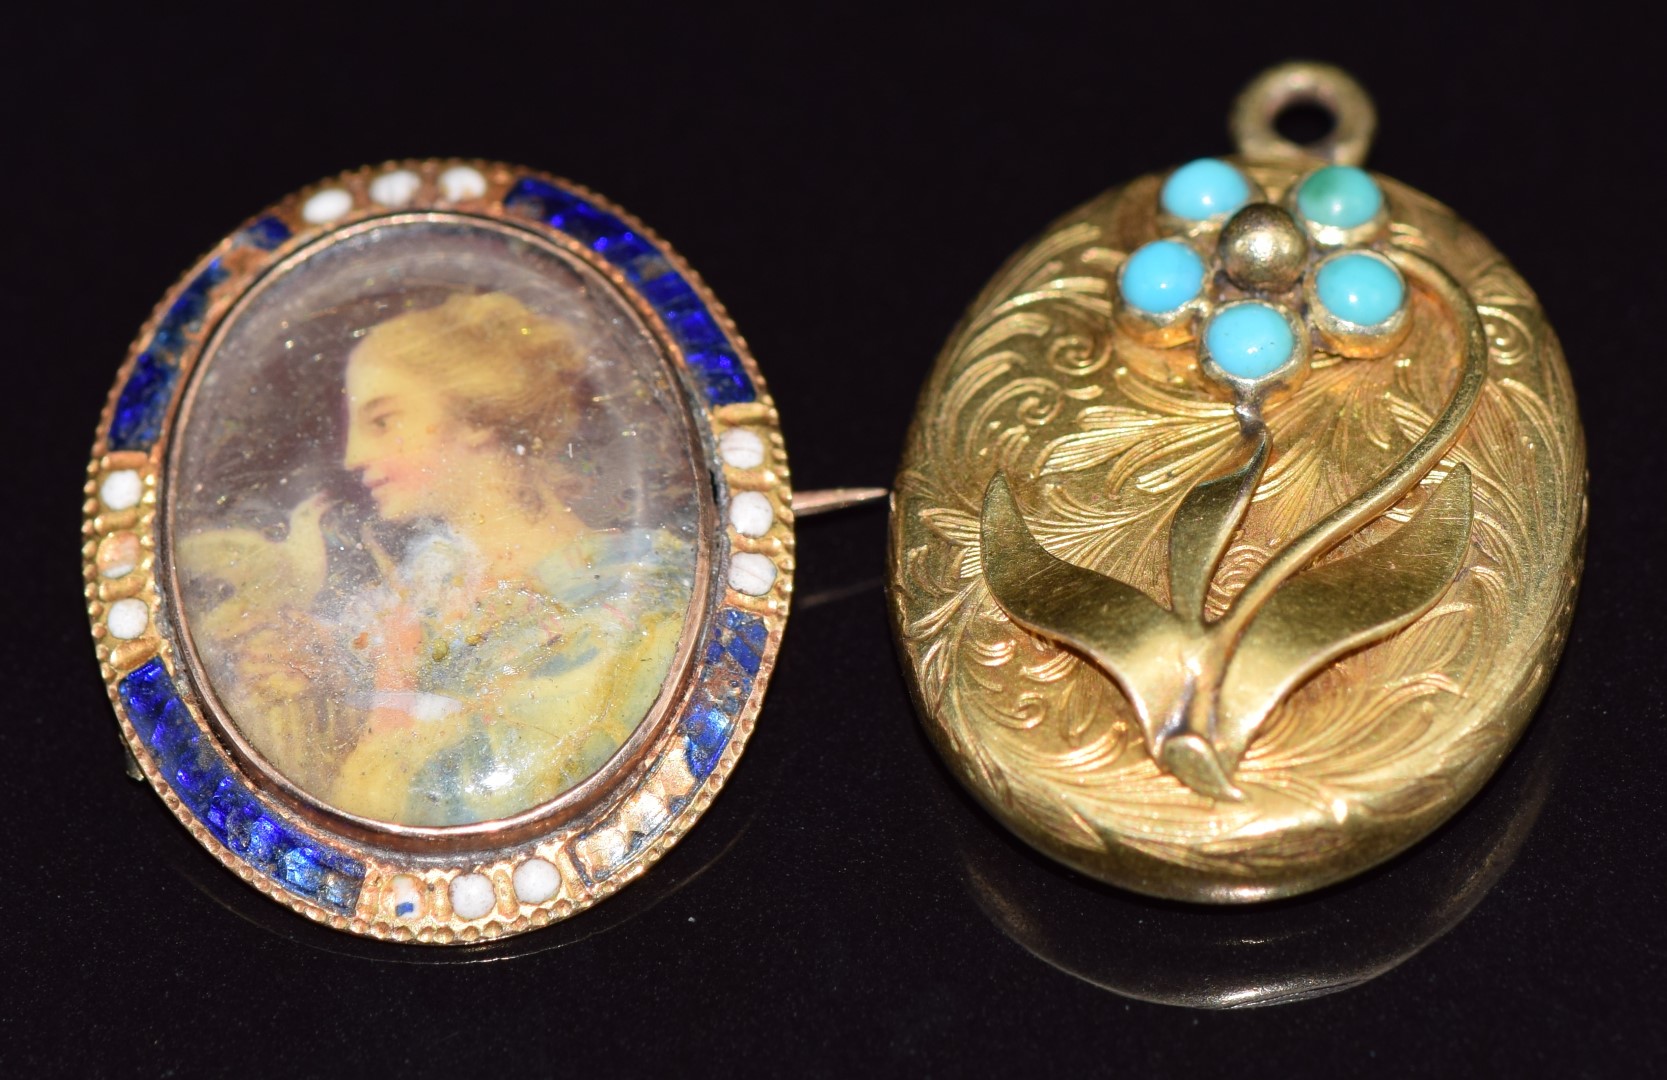 A yellow metal pendant/ locket set with turquoise cabochons and a Victorian brooch set with a